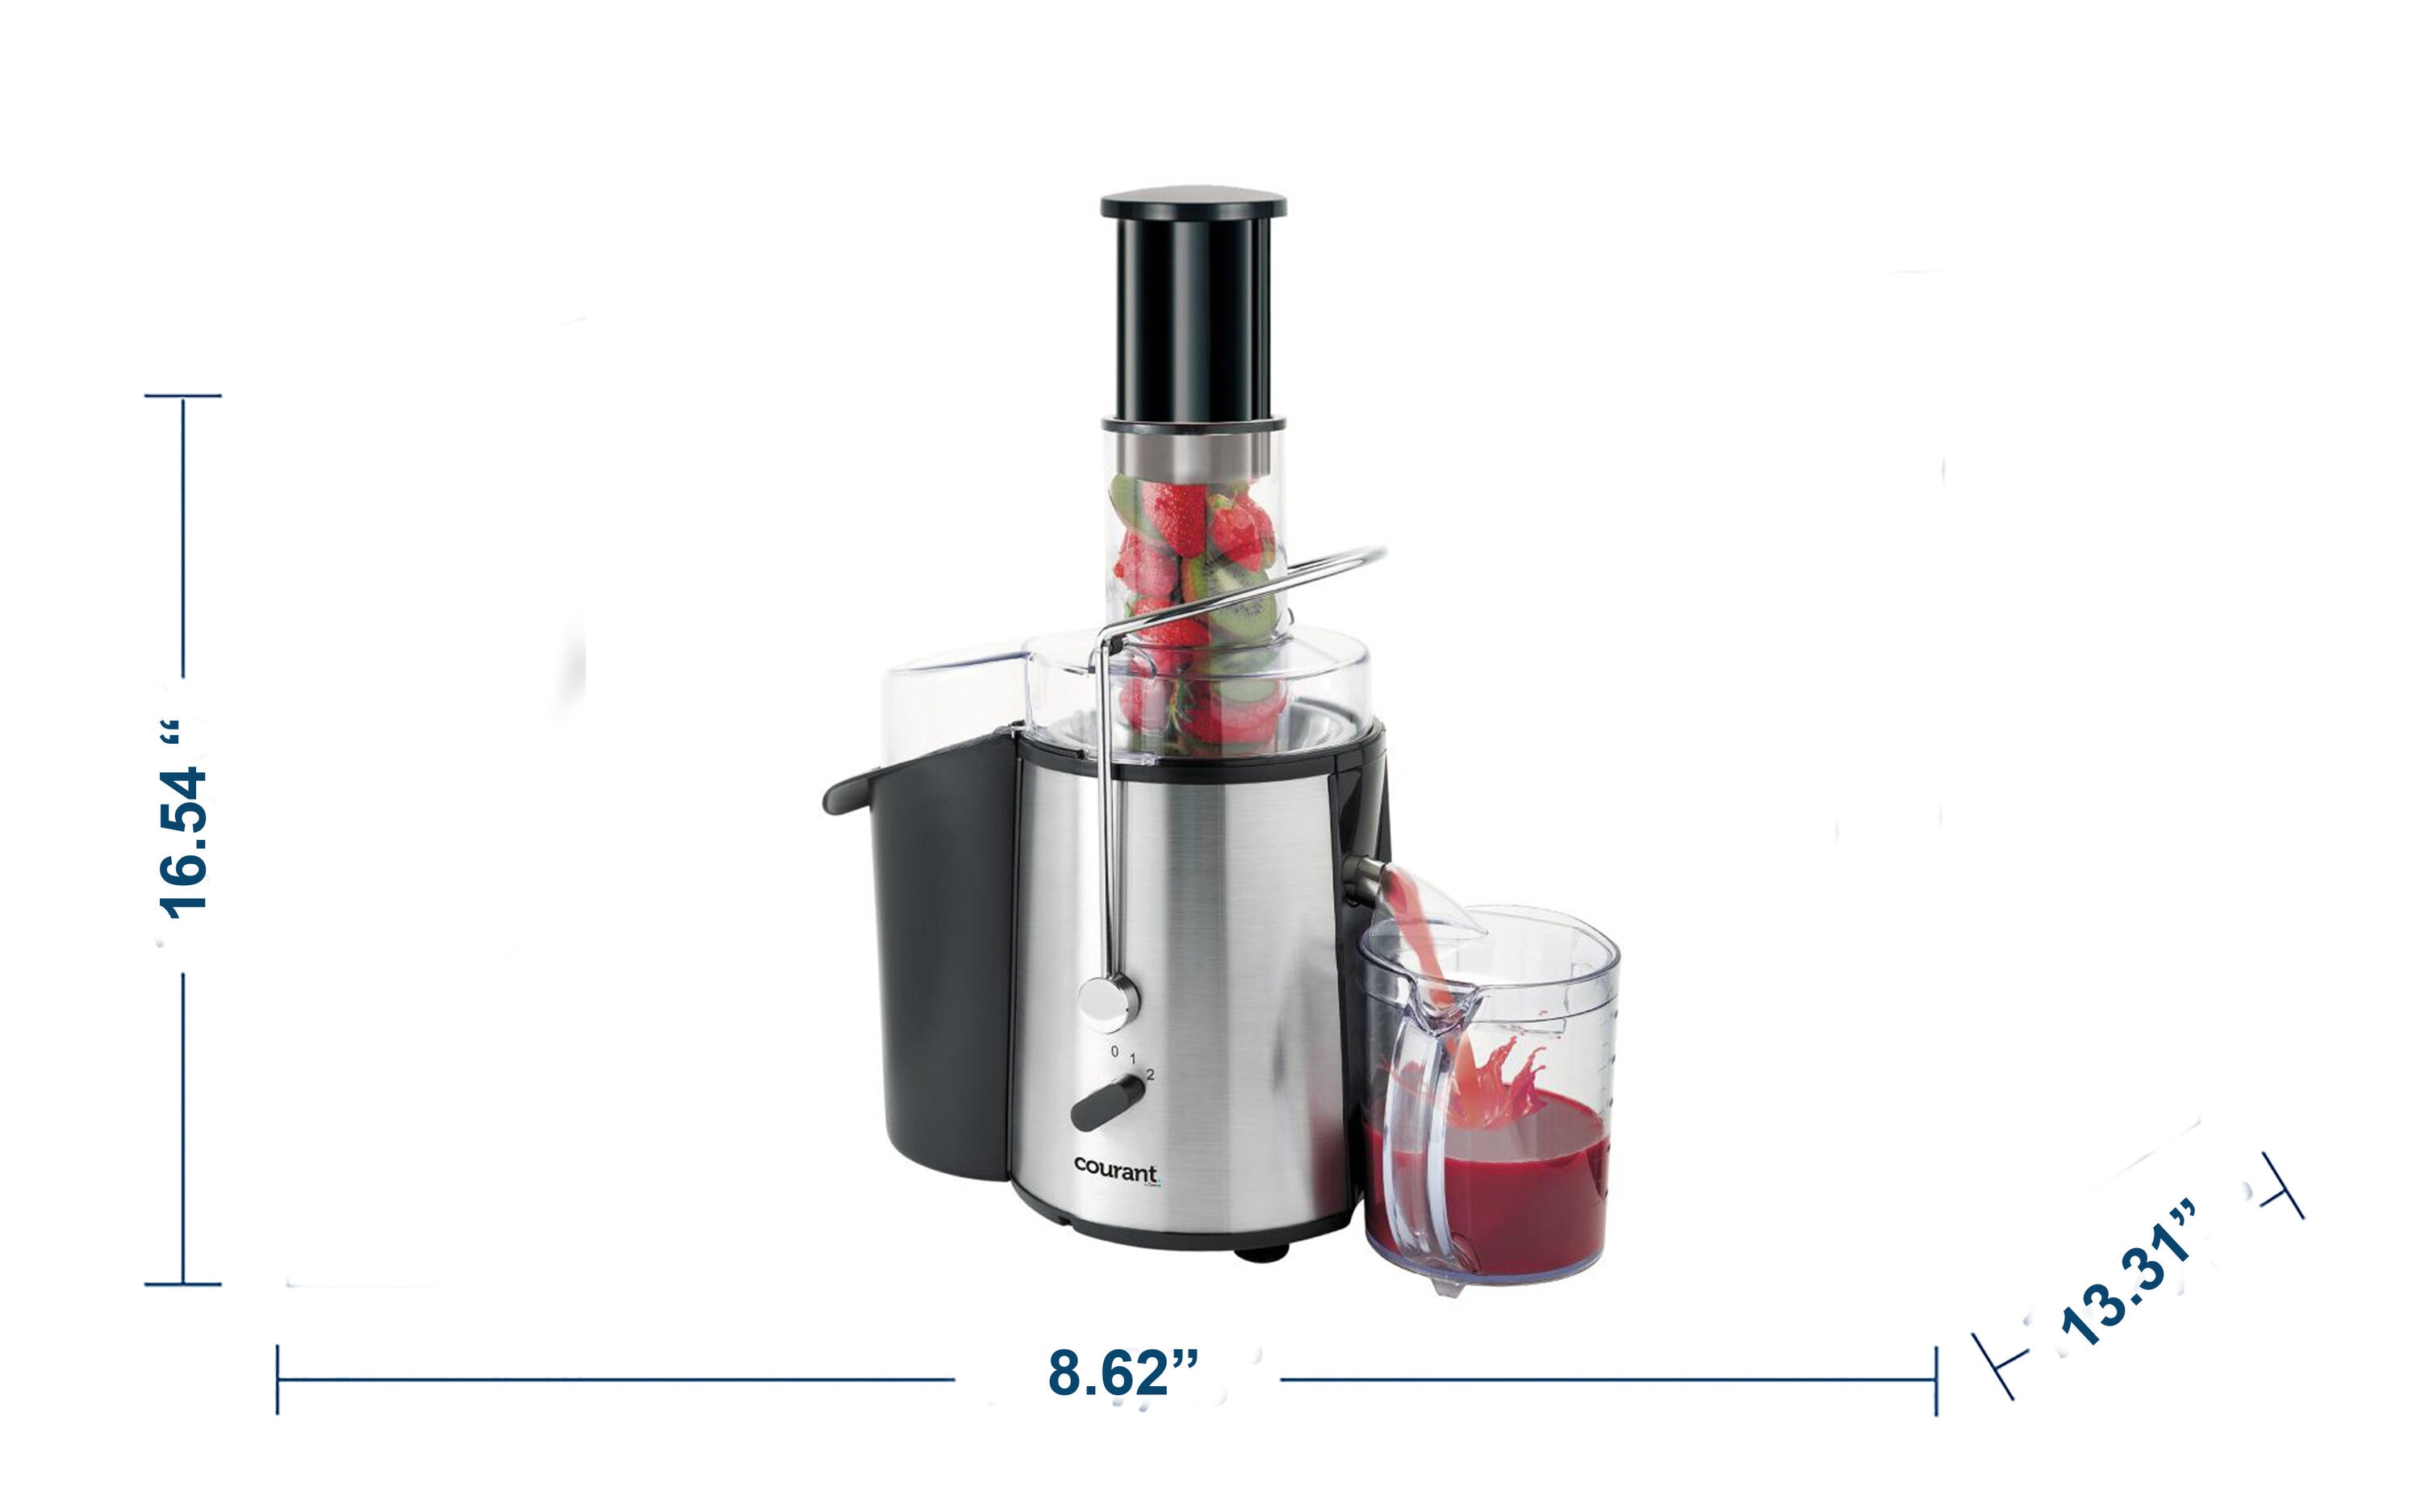 Centrifugal Juicer 750 Watts Powerful 3 Inches Wide Mouth for